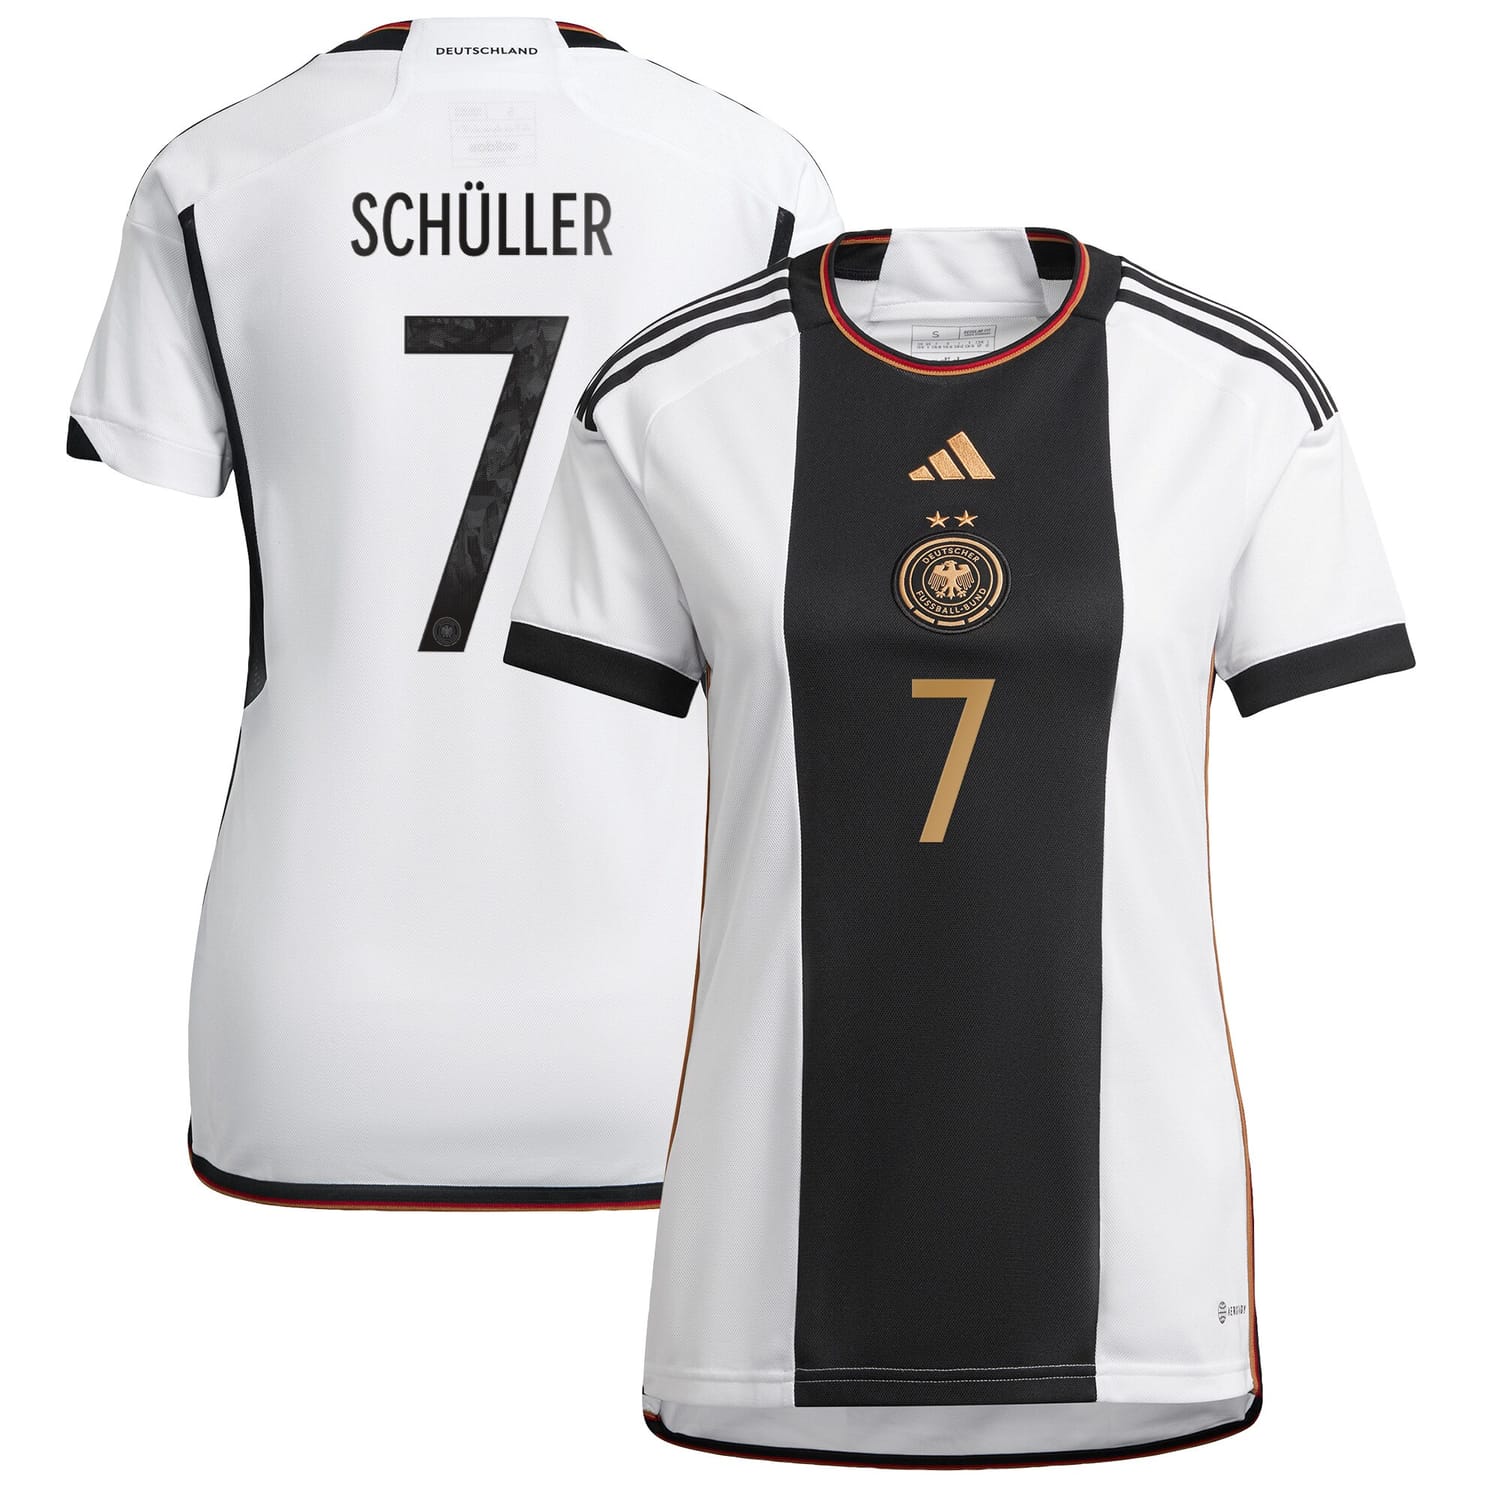 Germany National Team Home Jersey Shirt player Lea Schüller 7 printing for Women